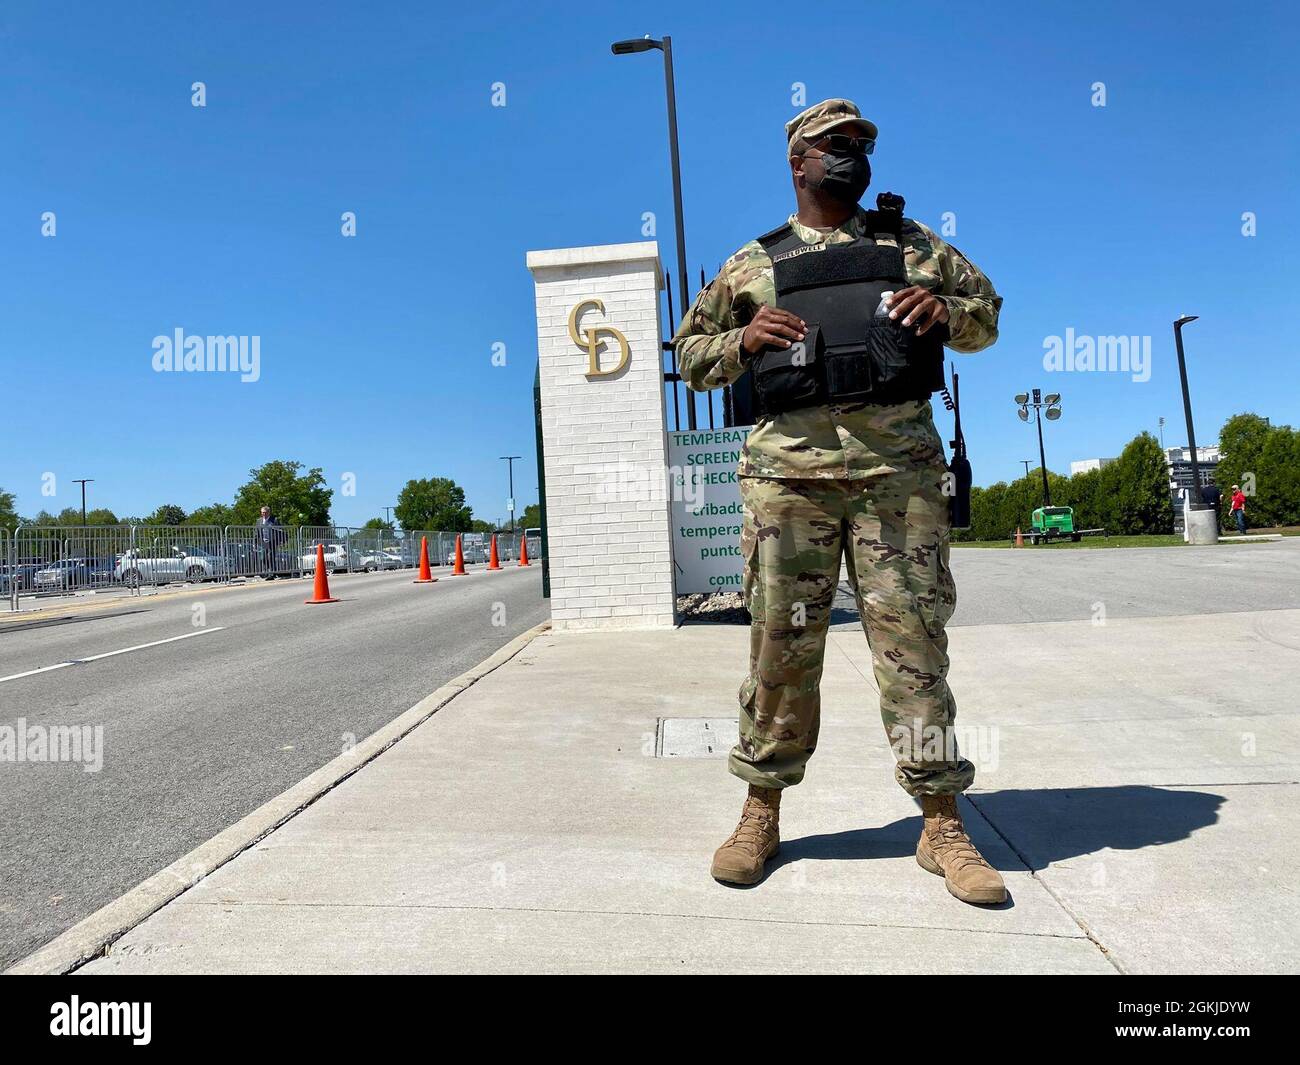 Sgt. David Hollowell with the 1792nd Combat Sustainment Support Battalion stands guard at a traffic entry point at Churchill Downs in Louisville, Ky., May 1, 2021. Nearly 100 Kentucky National Guard Soldiers and Airmen supported local authorities during the 147th running of the Kentucky Derby. Stock Photo